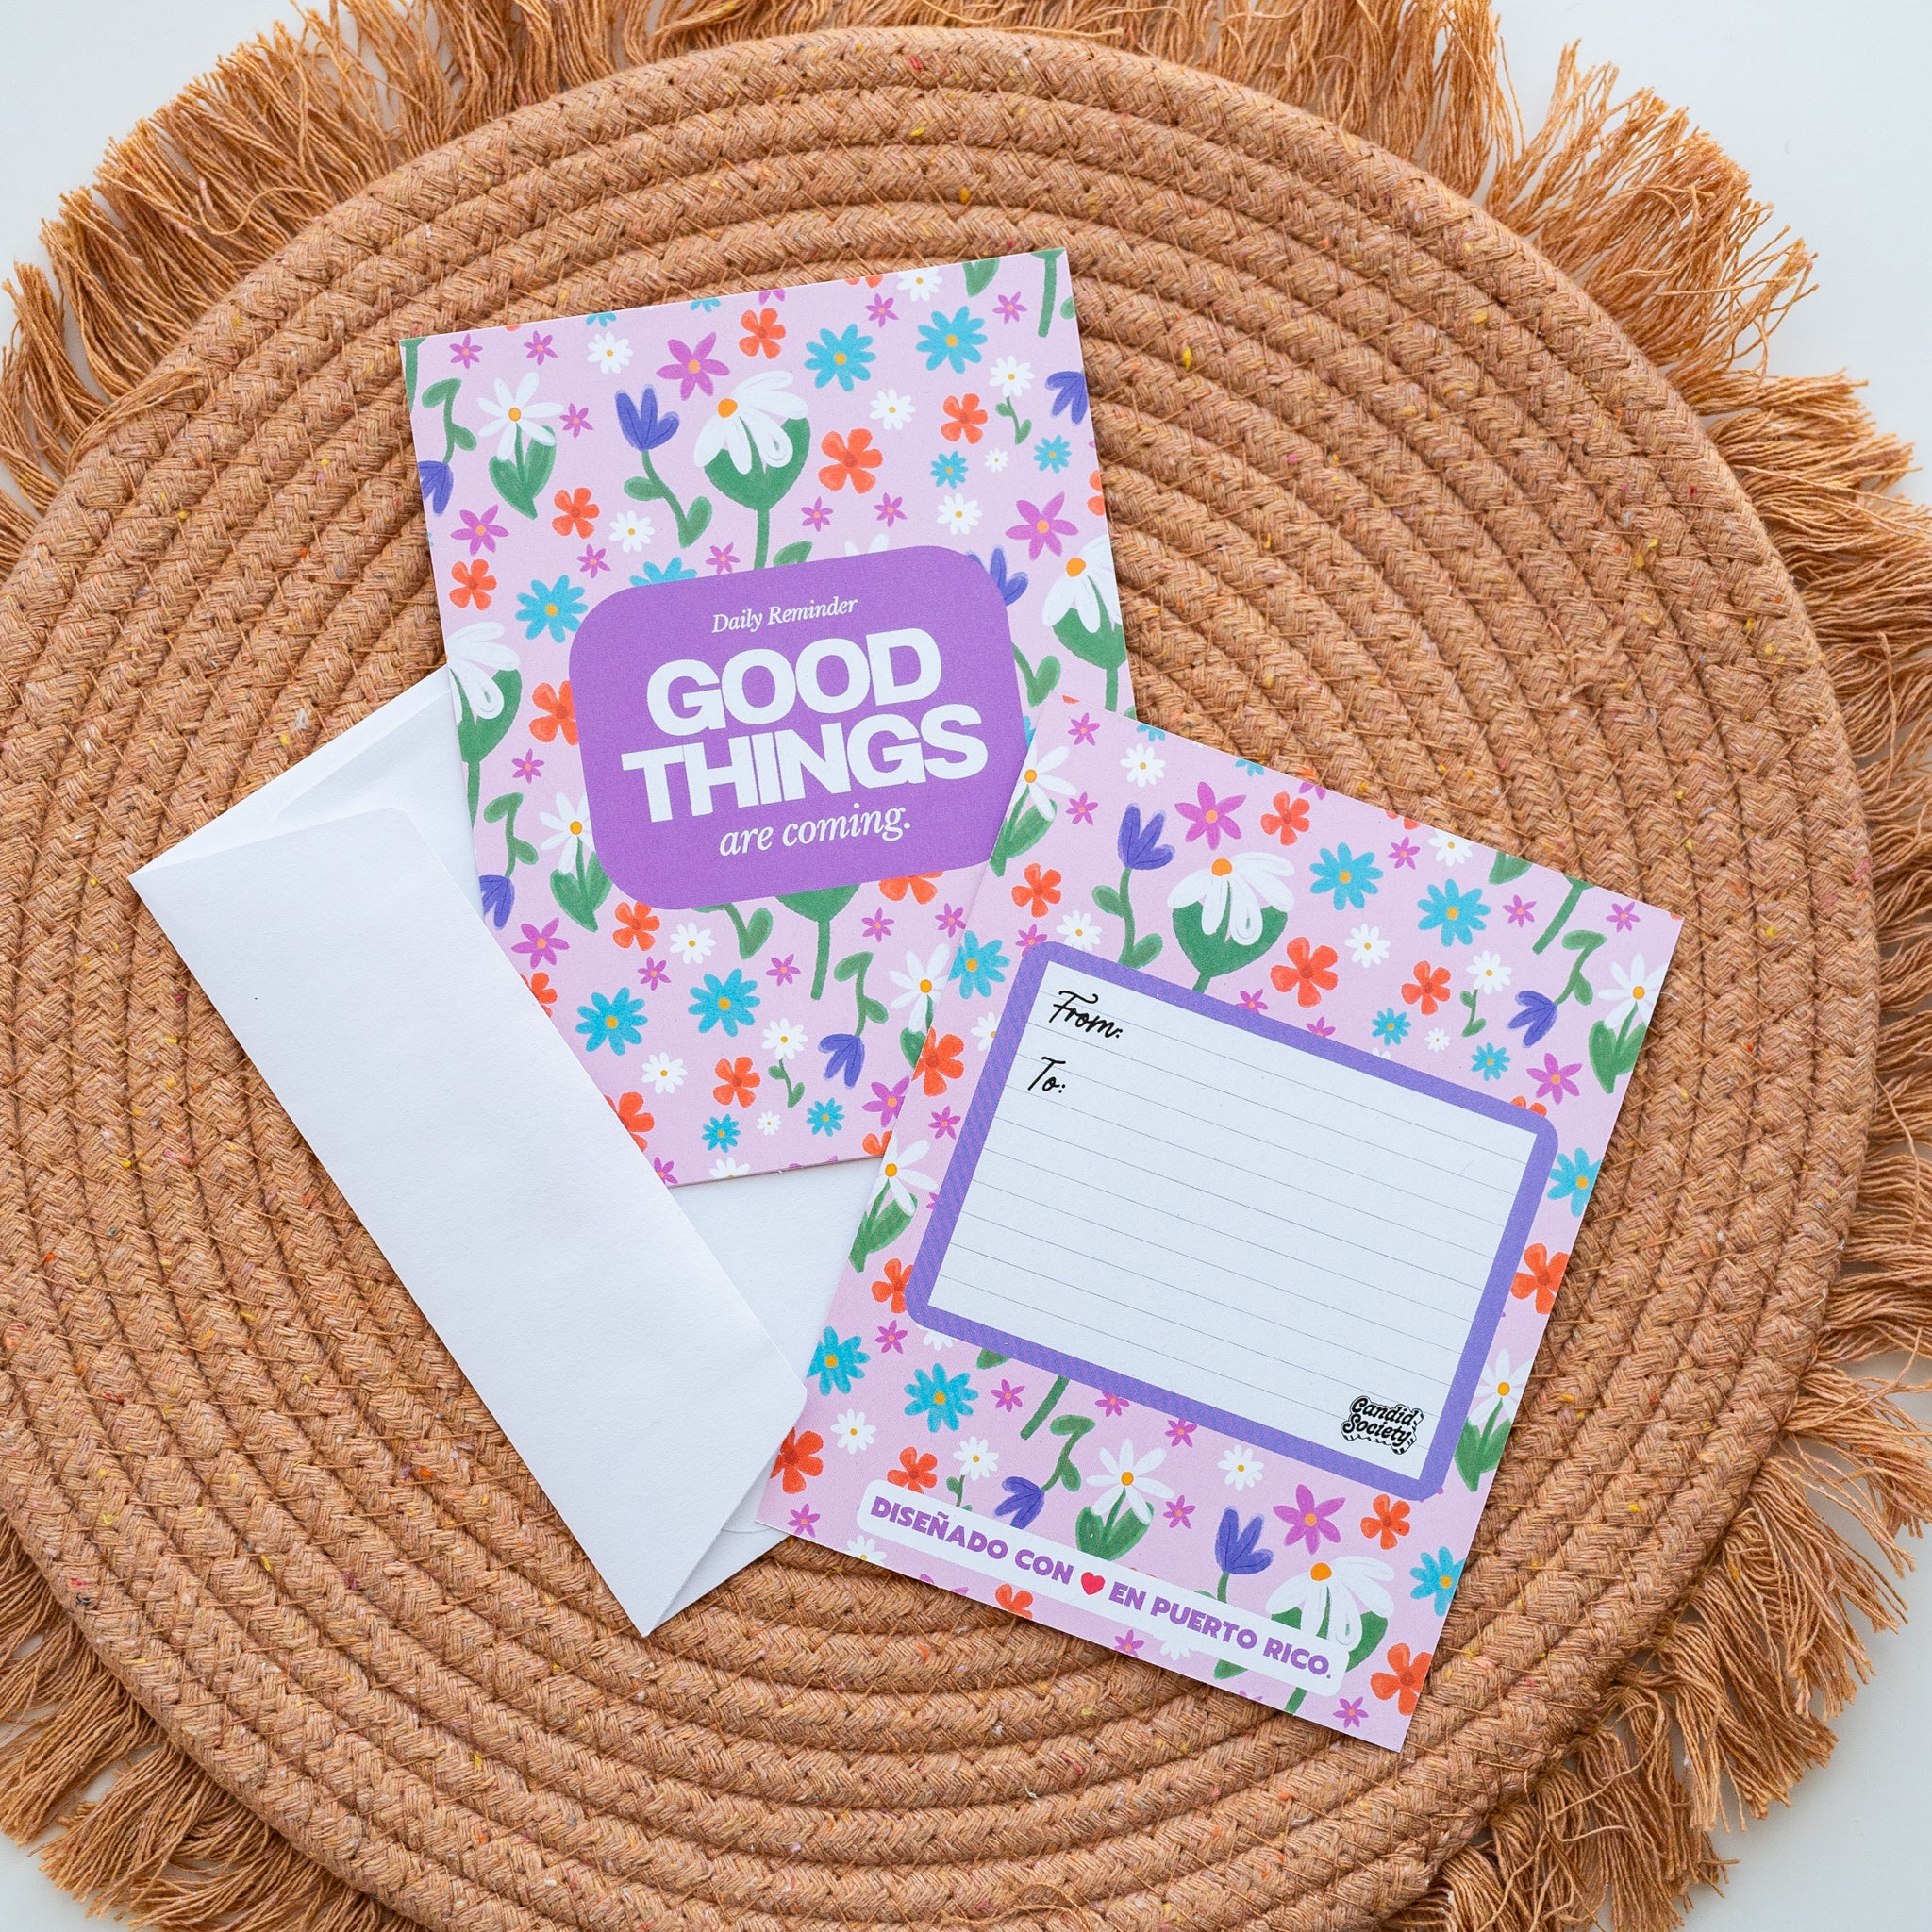 Good Things are Coming - Greeting Card